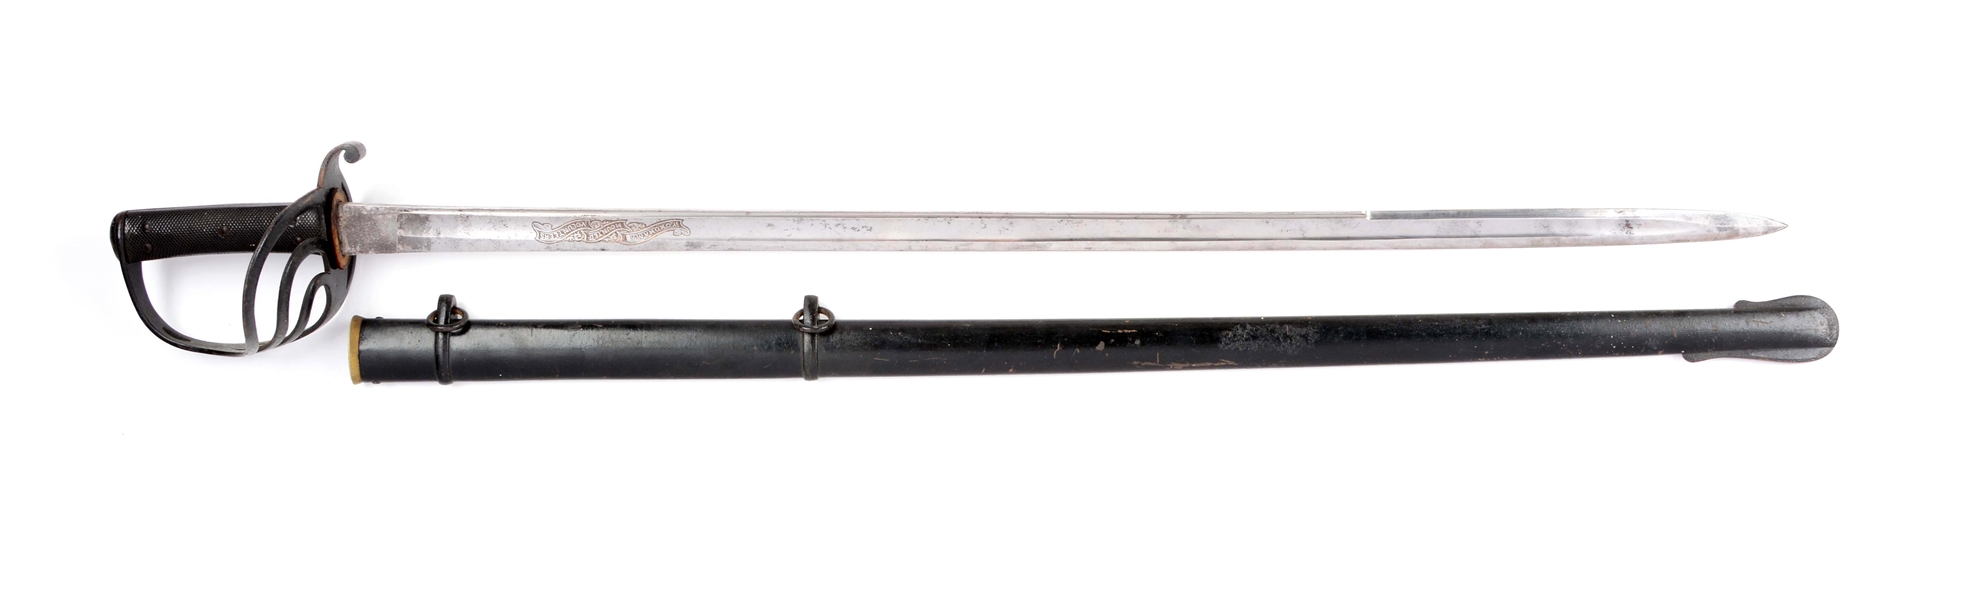 VERY RARE ENGLISH SABER BY WILKINSON OF PALL MALL.